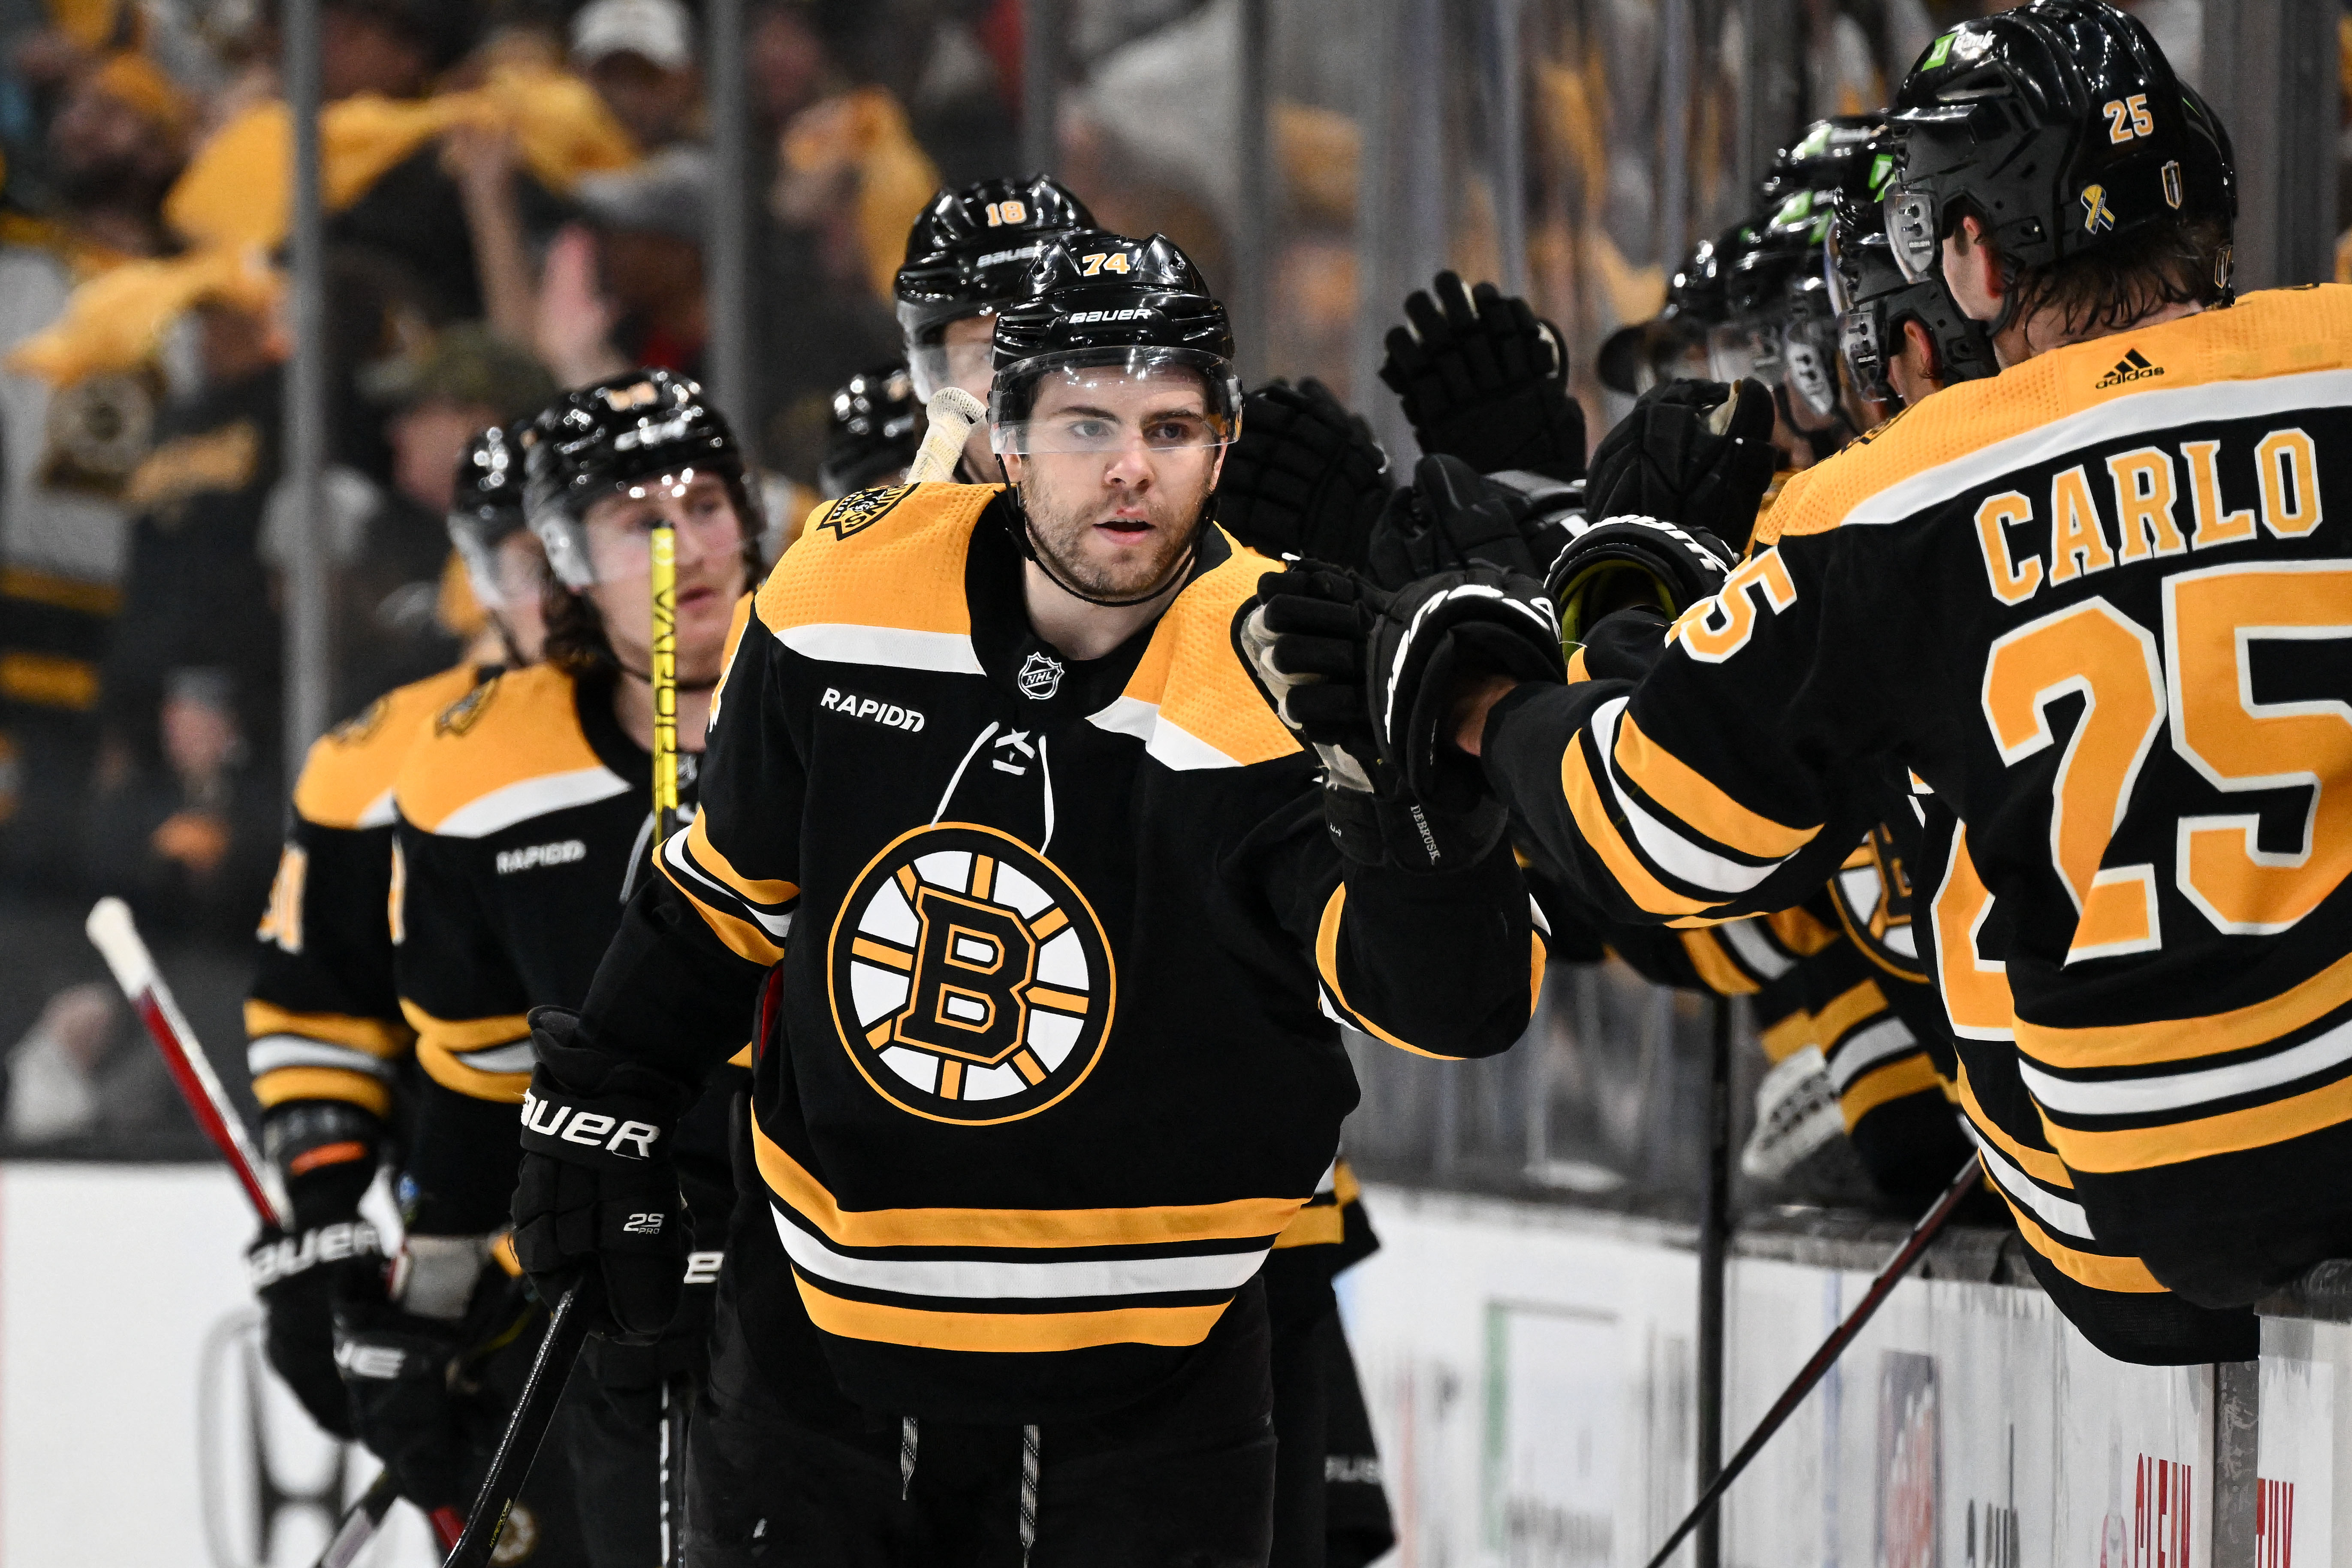 Milestone night for Bruins in Game 1 win over Panthers